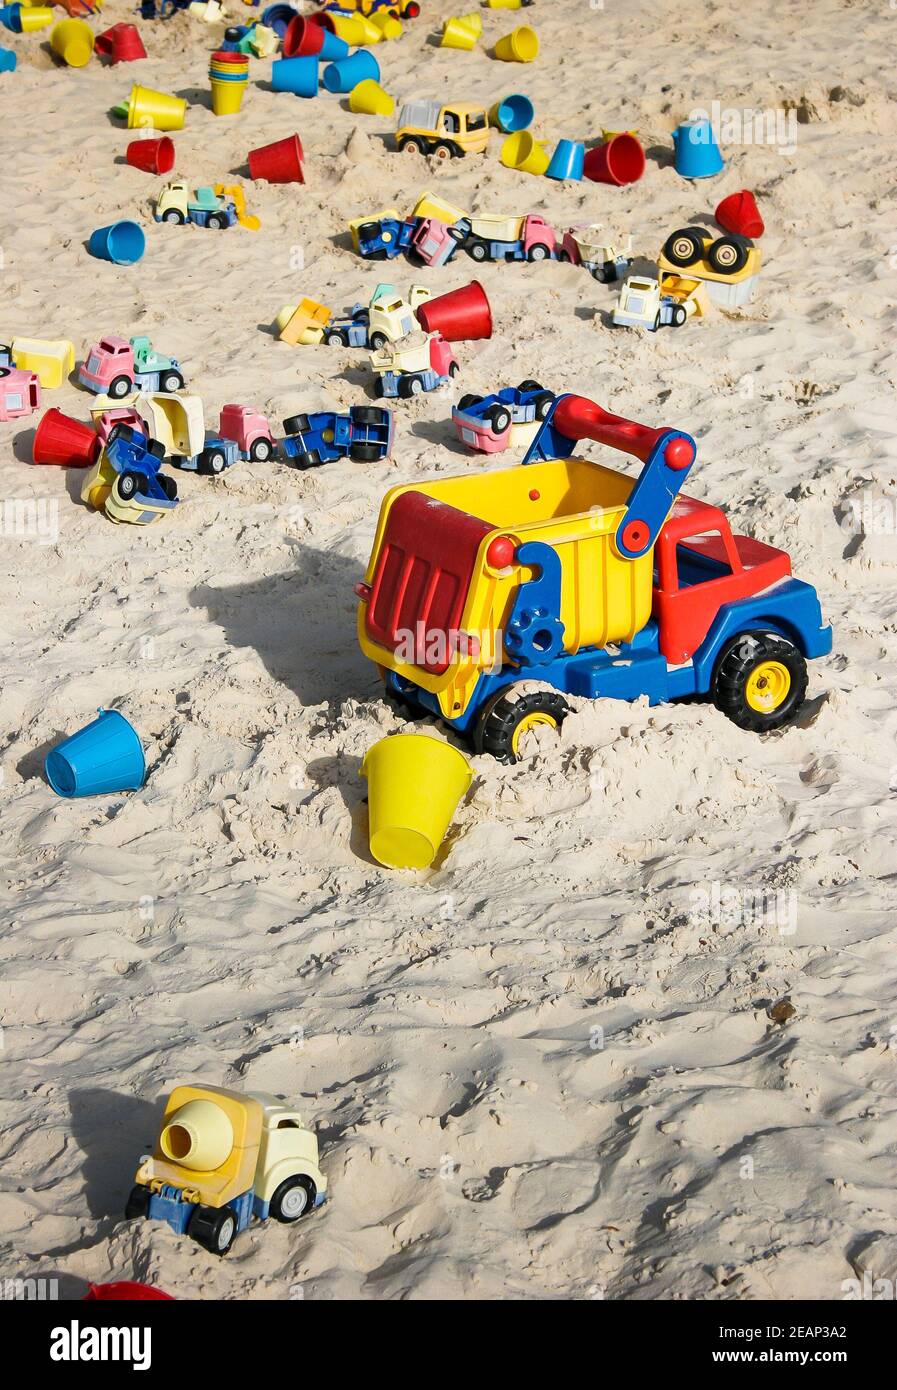 Huge sandpit with many toy dumper trucks for children's outdoor play in Godstone Farm, Surrey Stock Photo